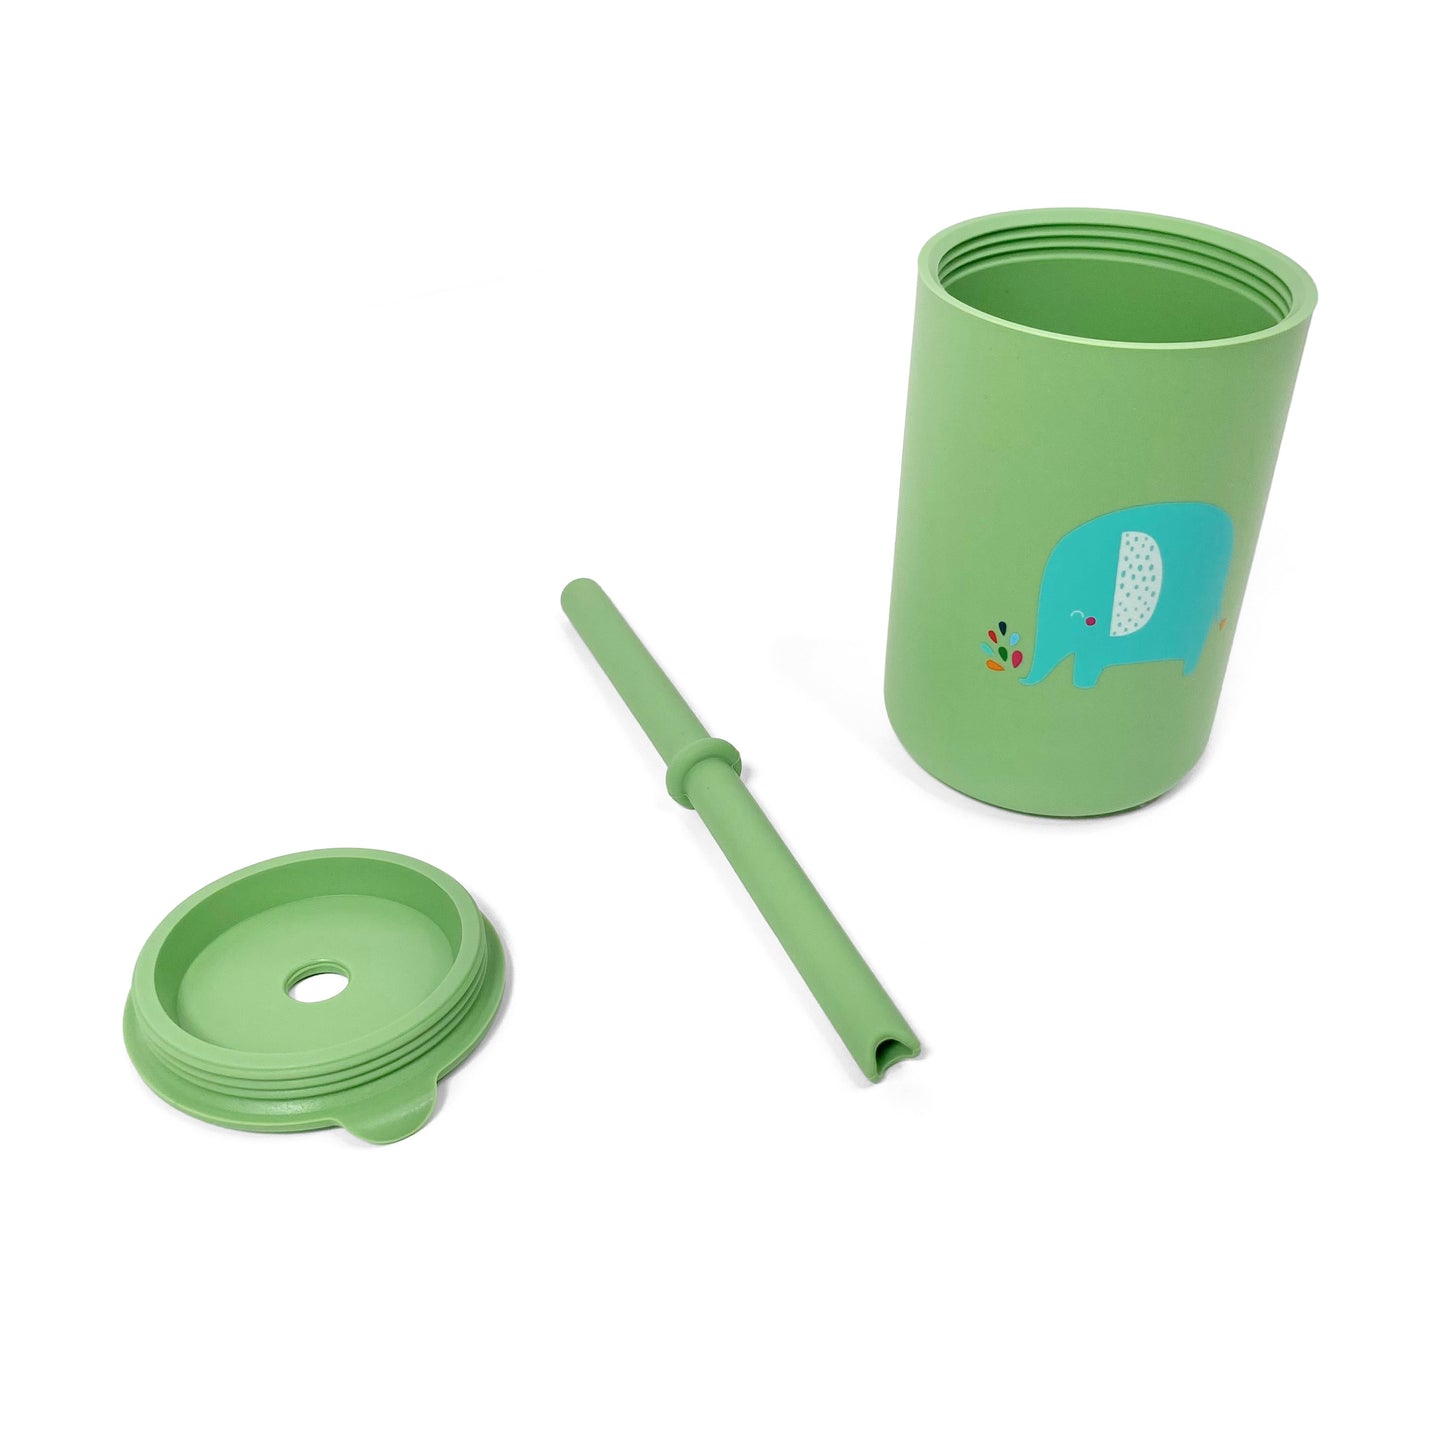 A children’s green silicone drinking cup, with matching lid and straw, featuring an elephant design. The image shows the cup, lid and straw separately.